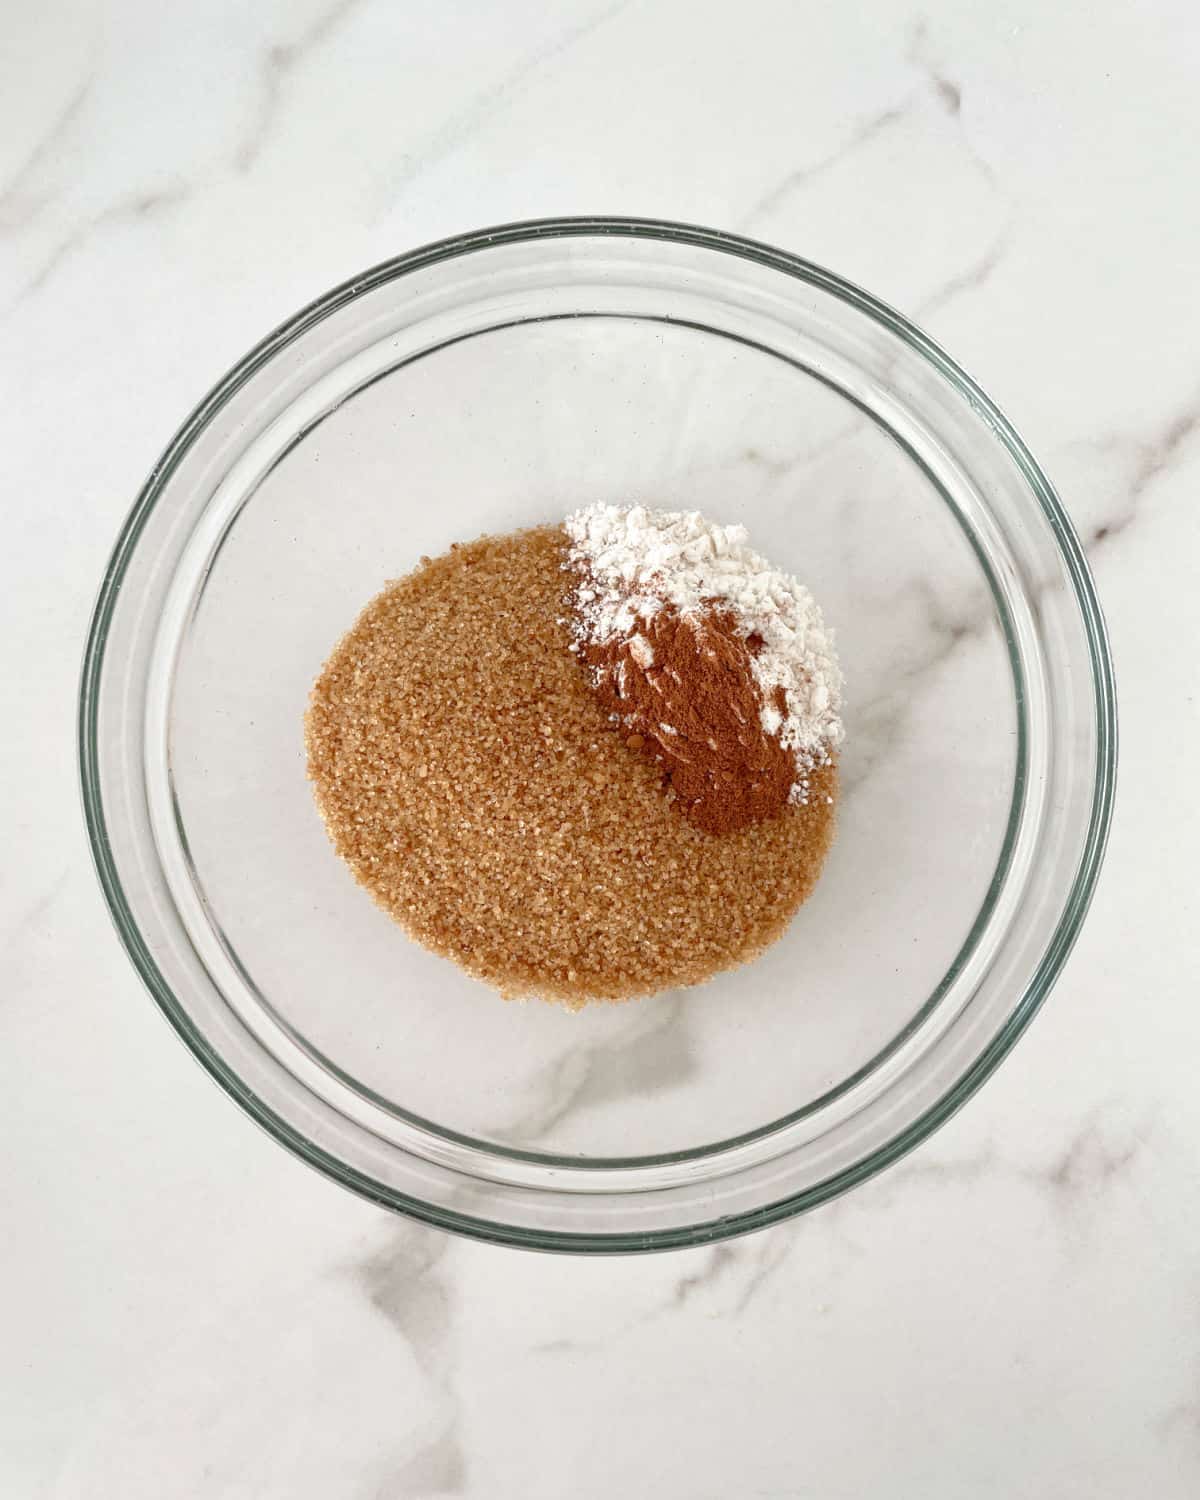 Dry streusel ingredients in a glass bowl on a white marble surface.